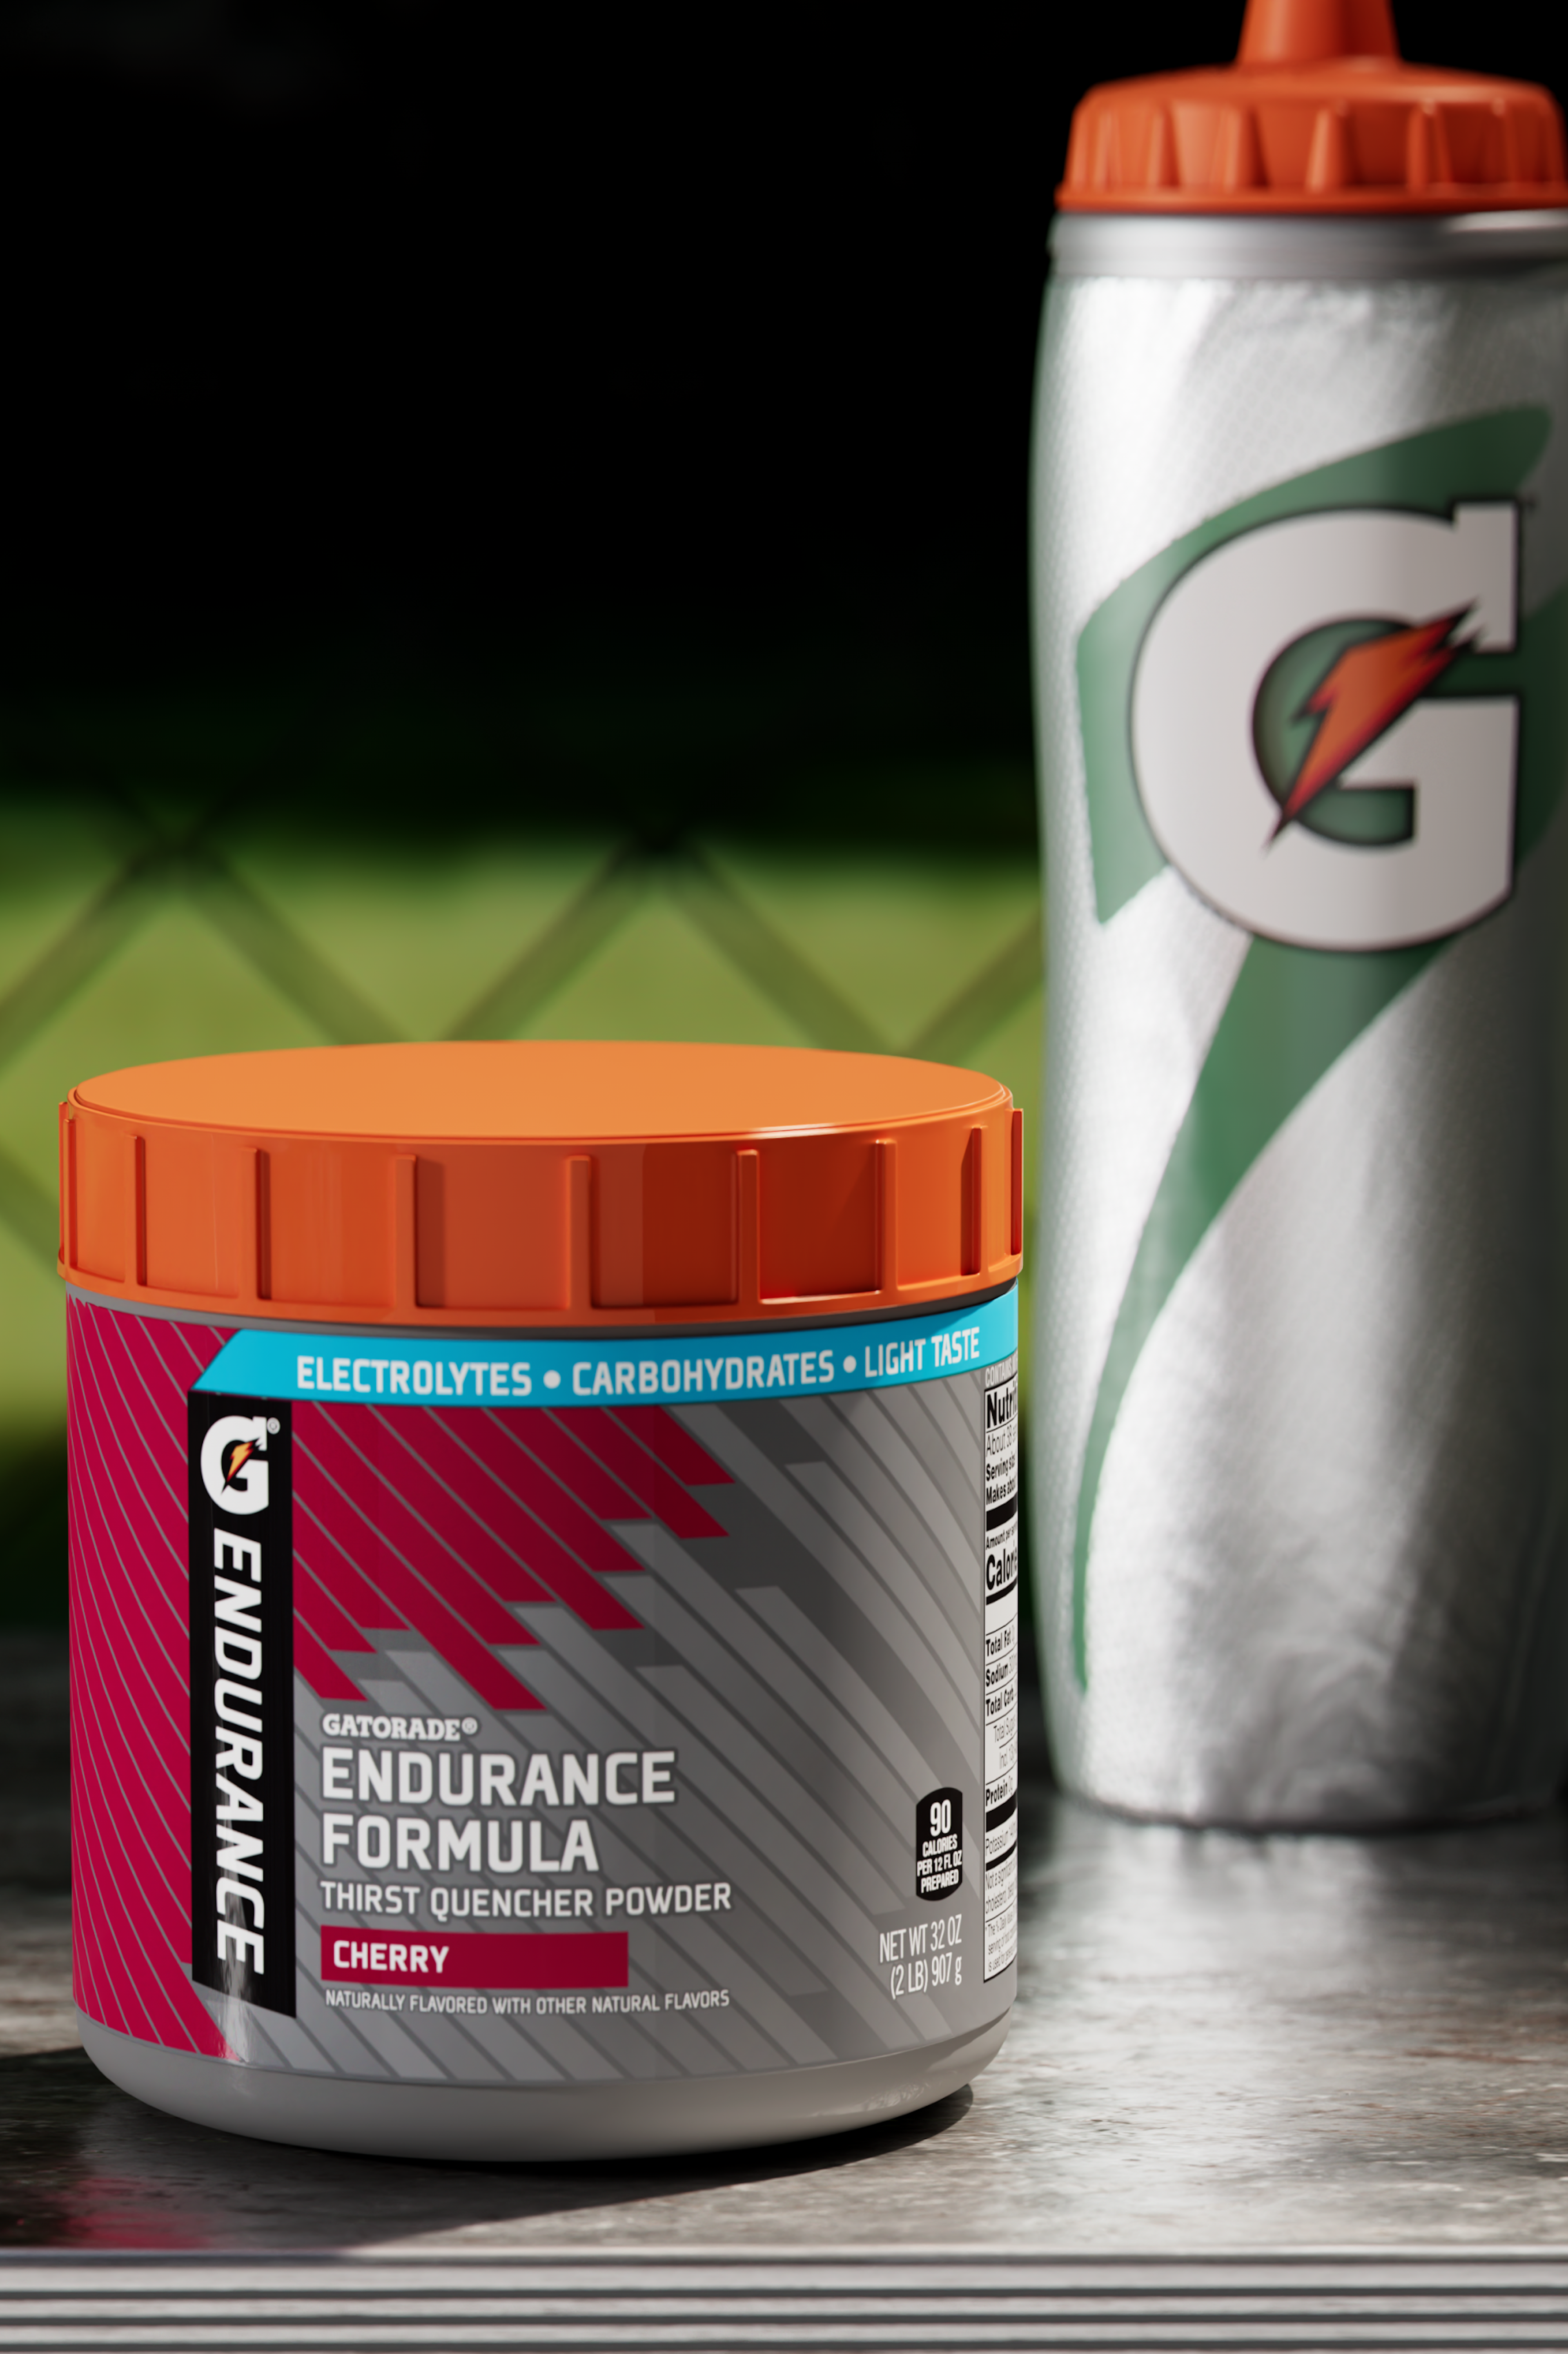 Endurance canister cherry with Gx bottle